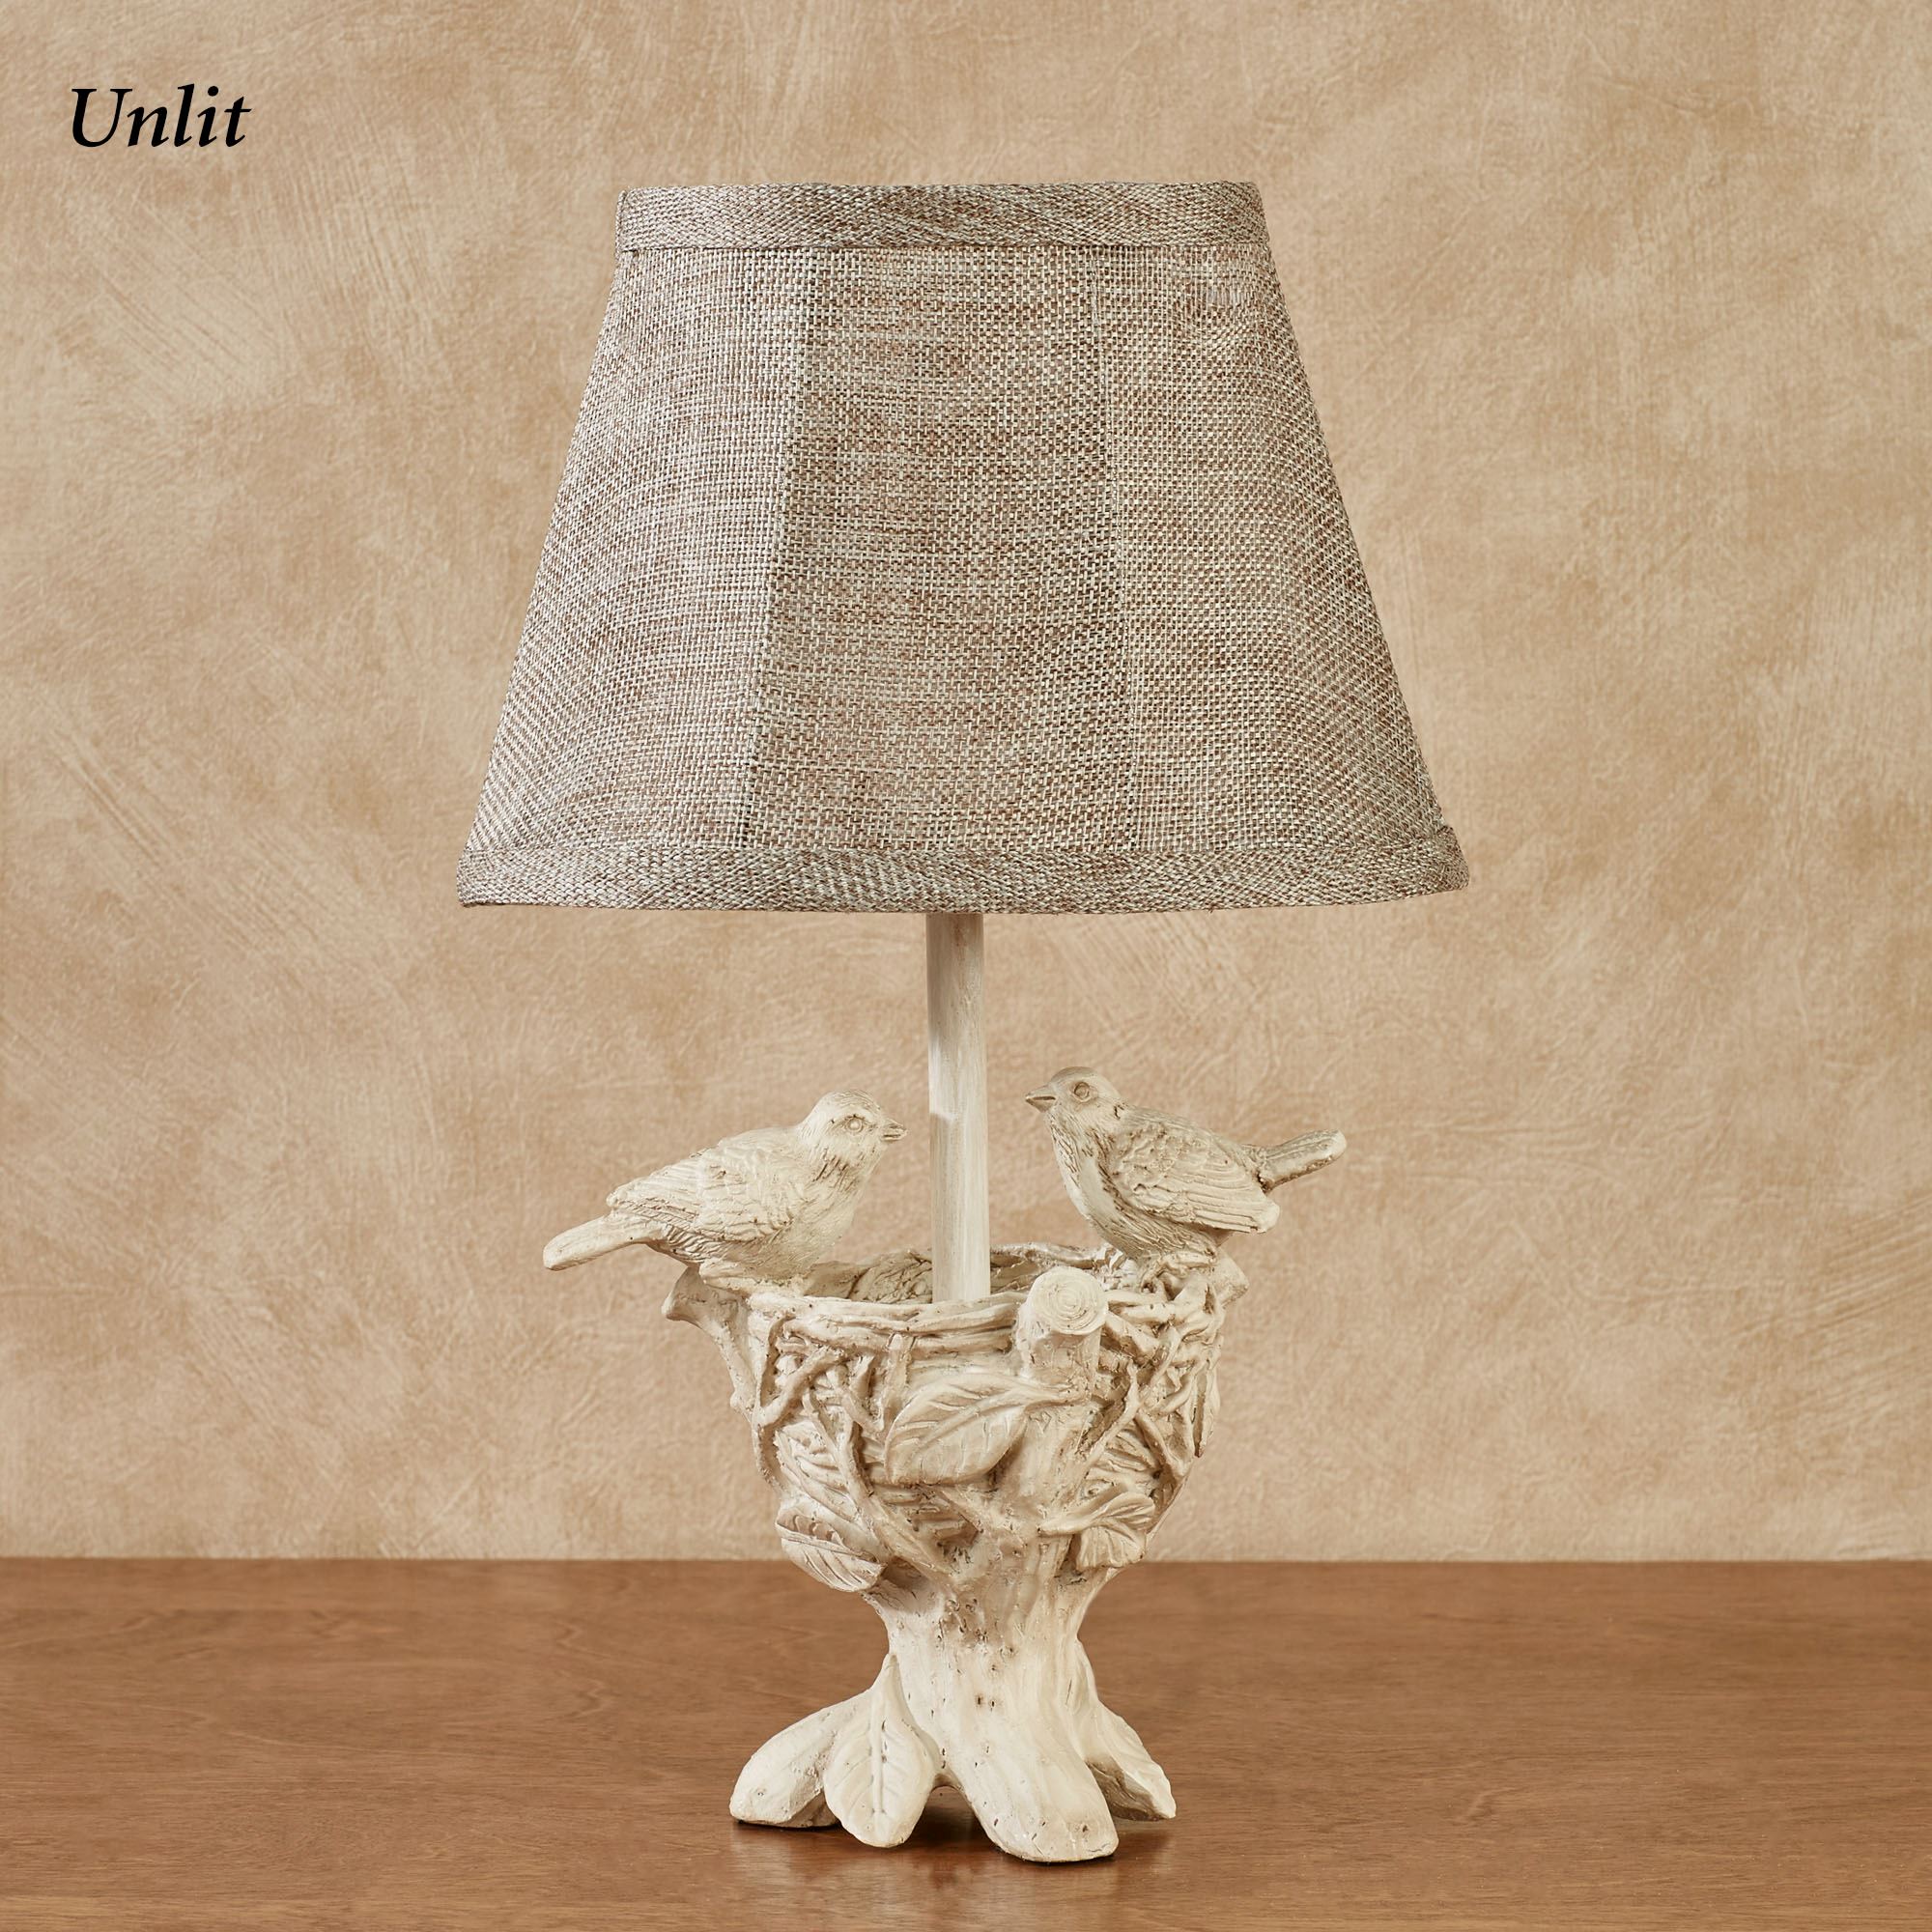 watching over the young bird nest small accent lamp pertaining decor tiny table lamps hoffman furniture square outdoor dining round rope coffee lift top side kids bedside target